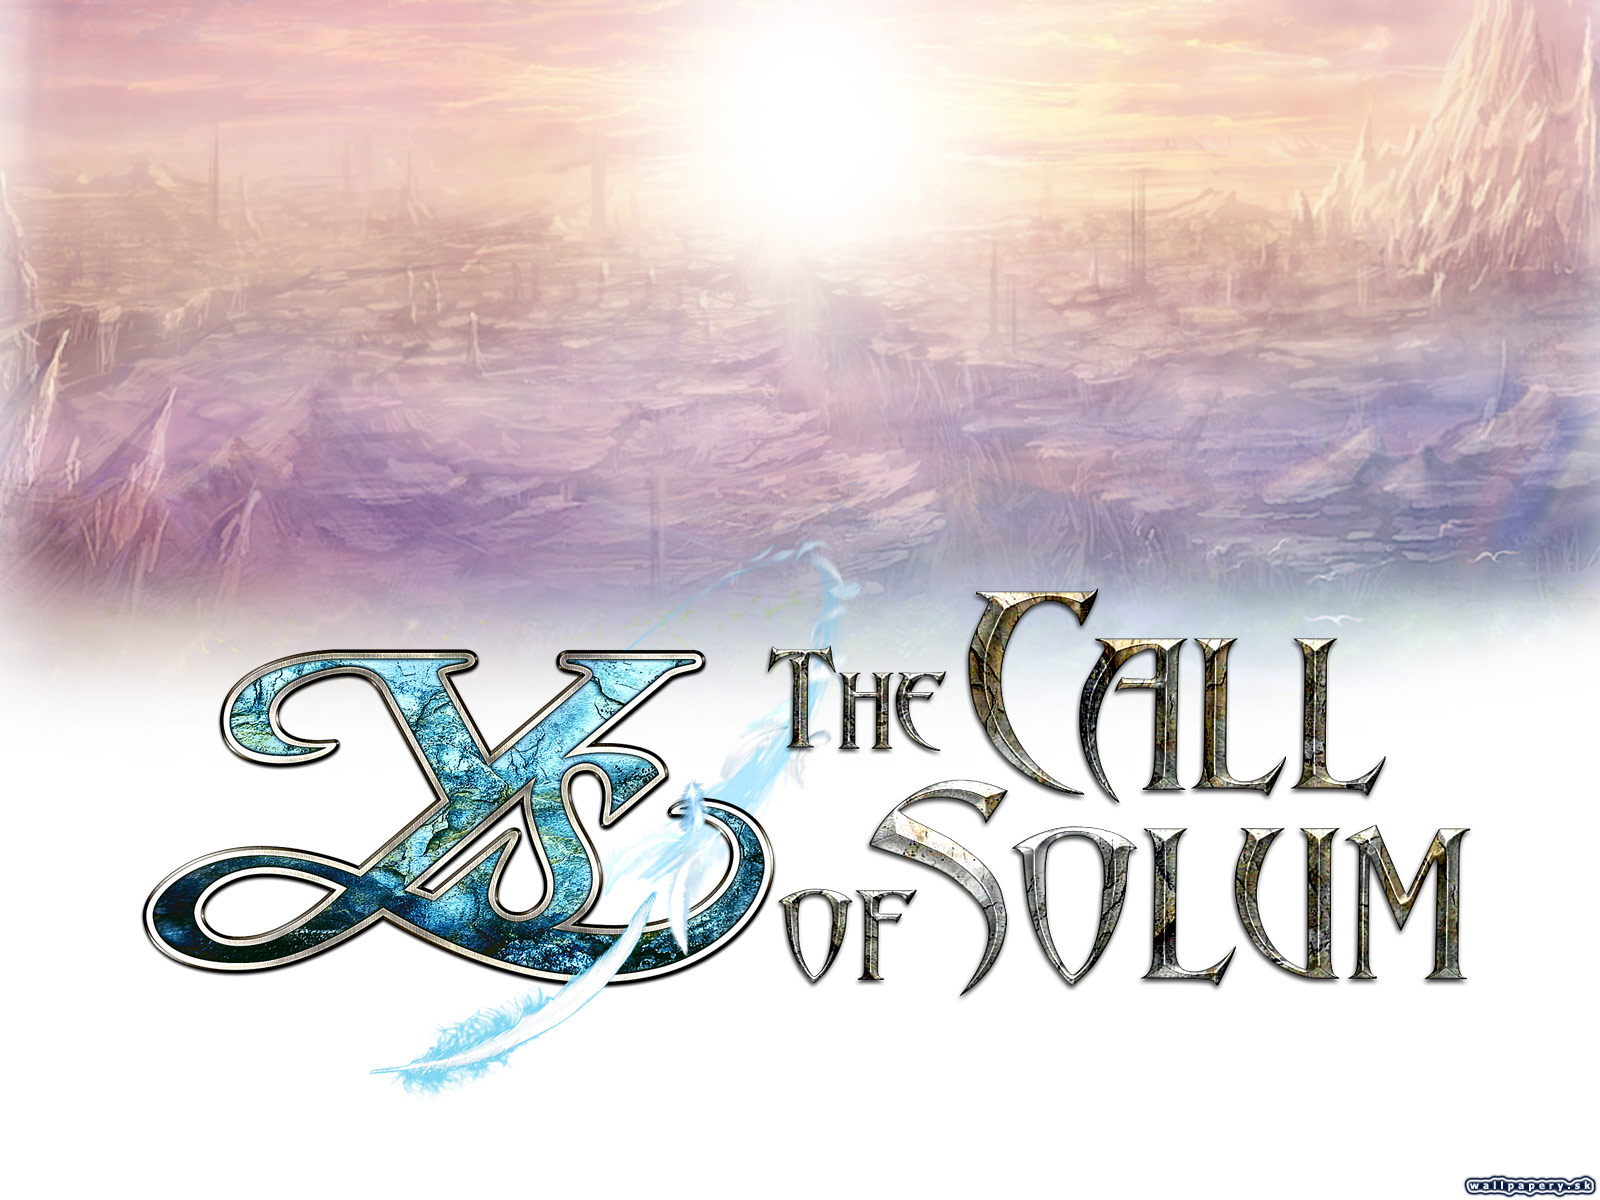 Ys Online: The Call of Solum - wallpaper 4